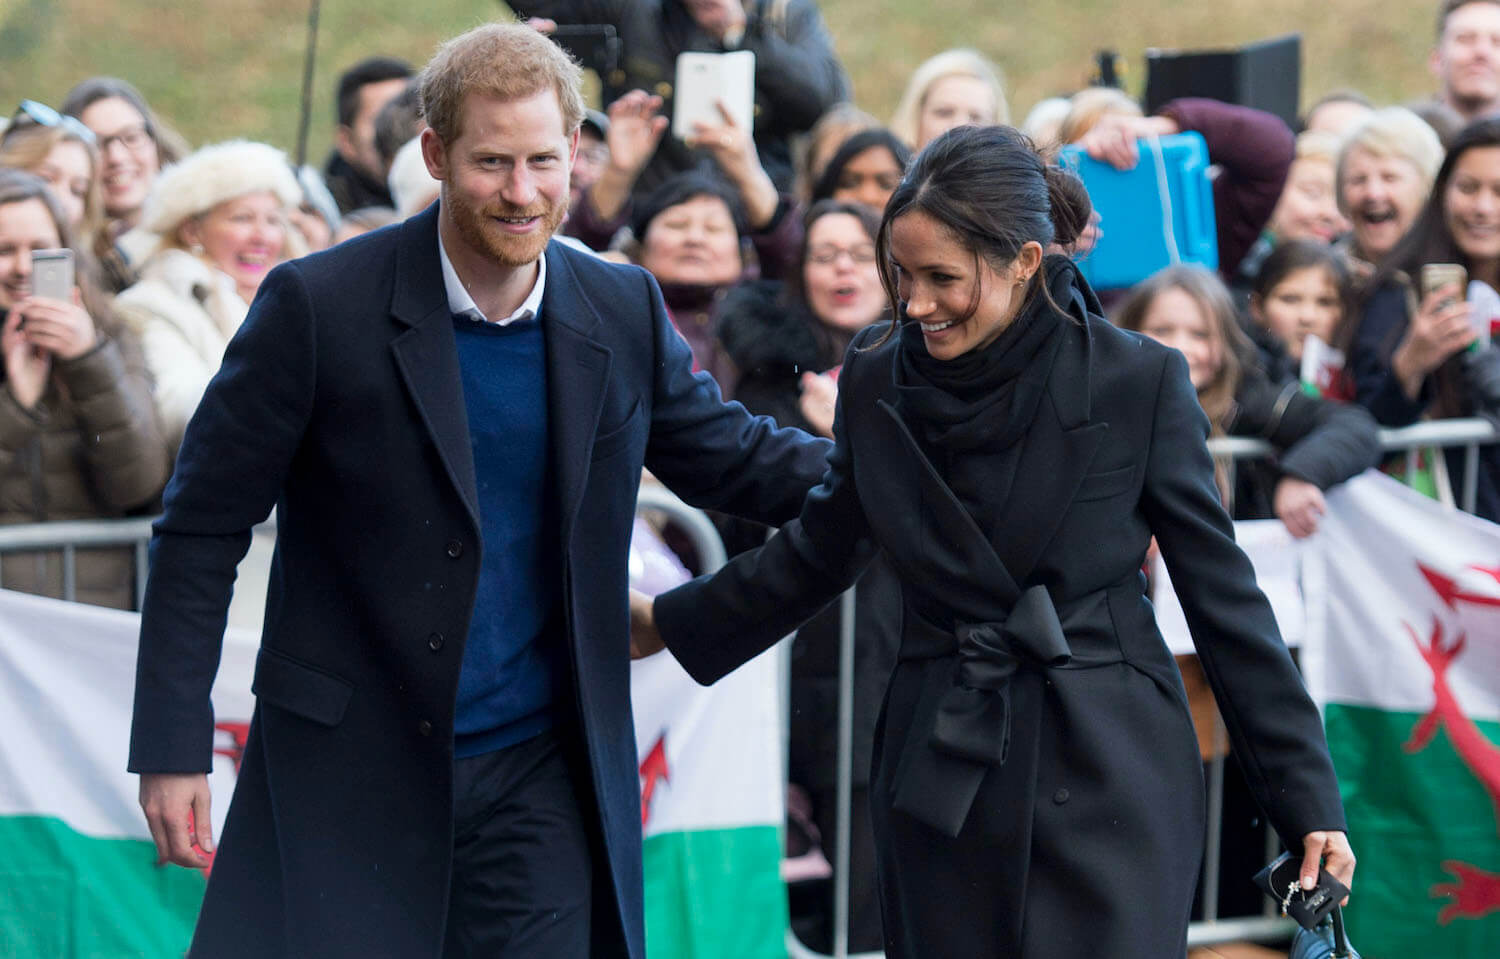 Meghan Markle’s Subtle Gesture to Prince Harry During 2018 Appearance Sent a Strong Message, Body Language Expert Says